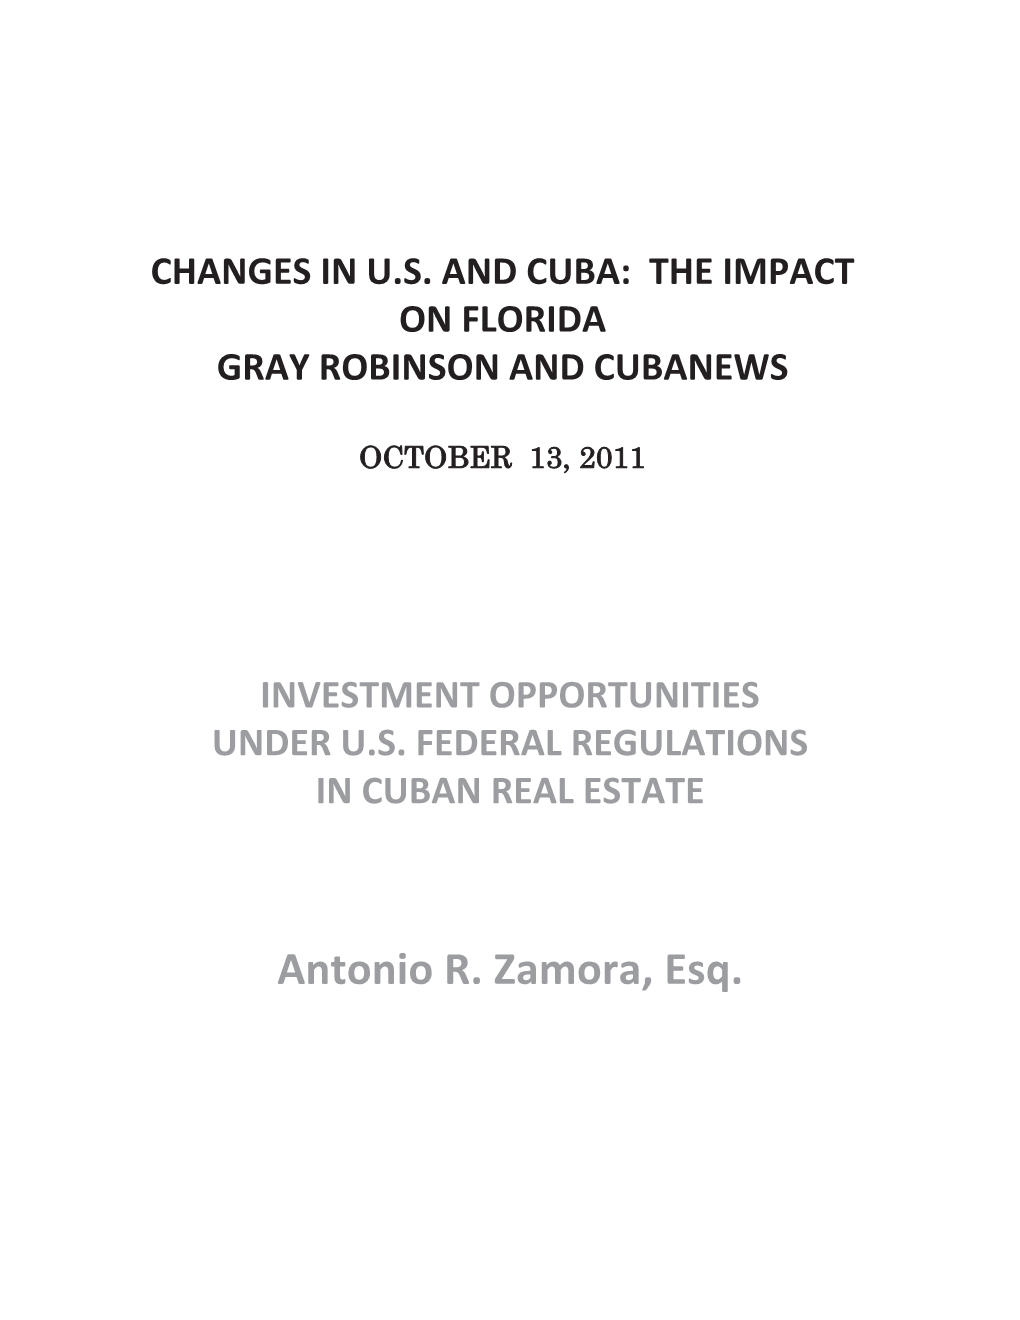 Antonio R. Zamora, Esq. Before Looking at the Opportunities for Investments in Cuba in Real Estate We Have to Answer Three Questions: 1